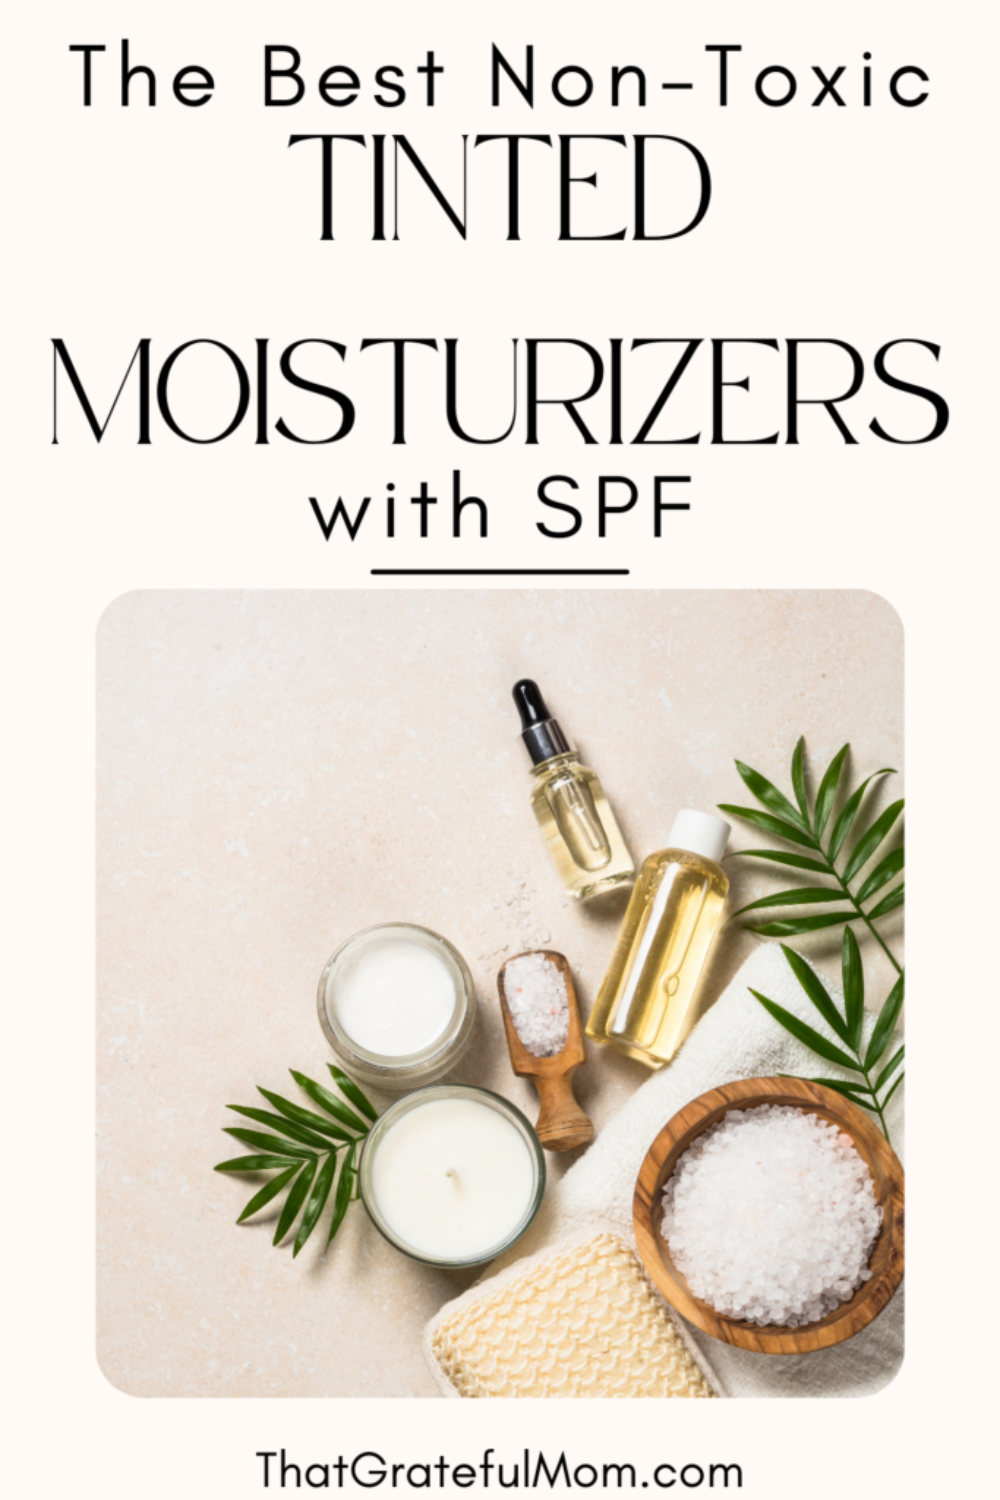 The best non-toxic tinted moisturizer pin 2